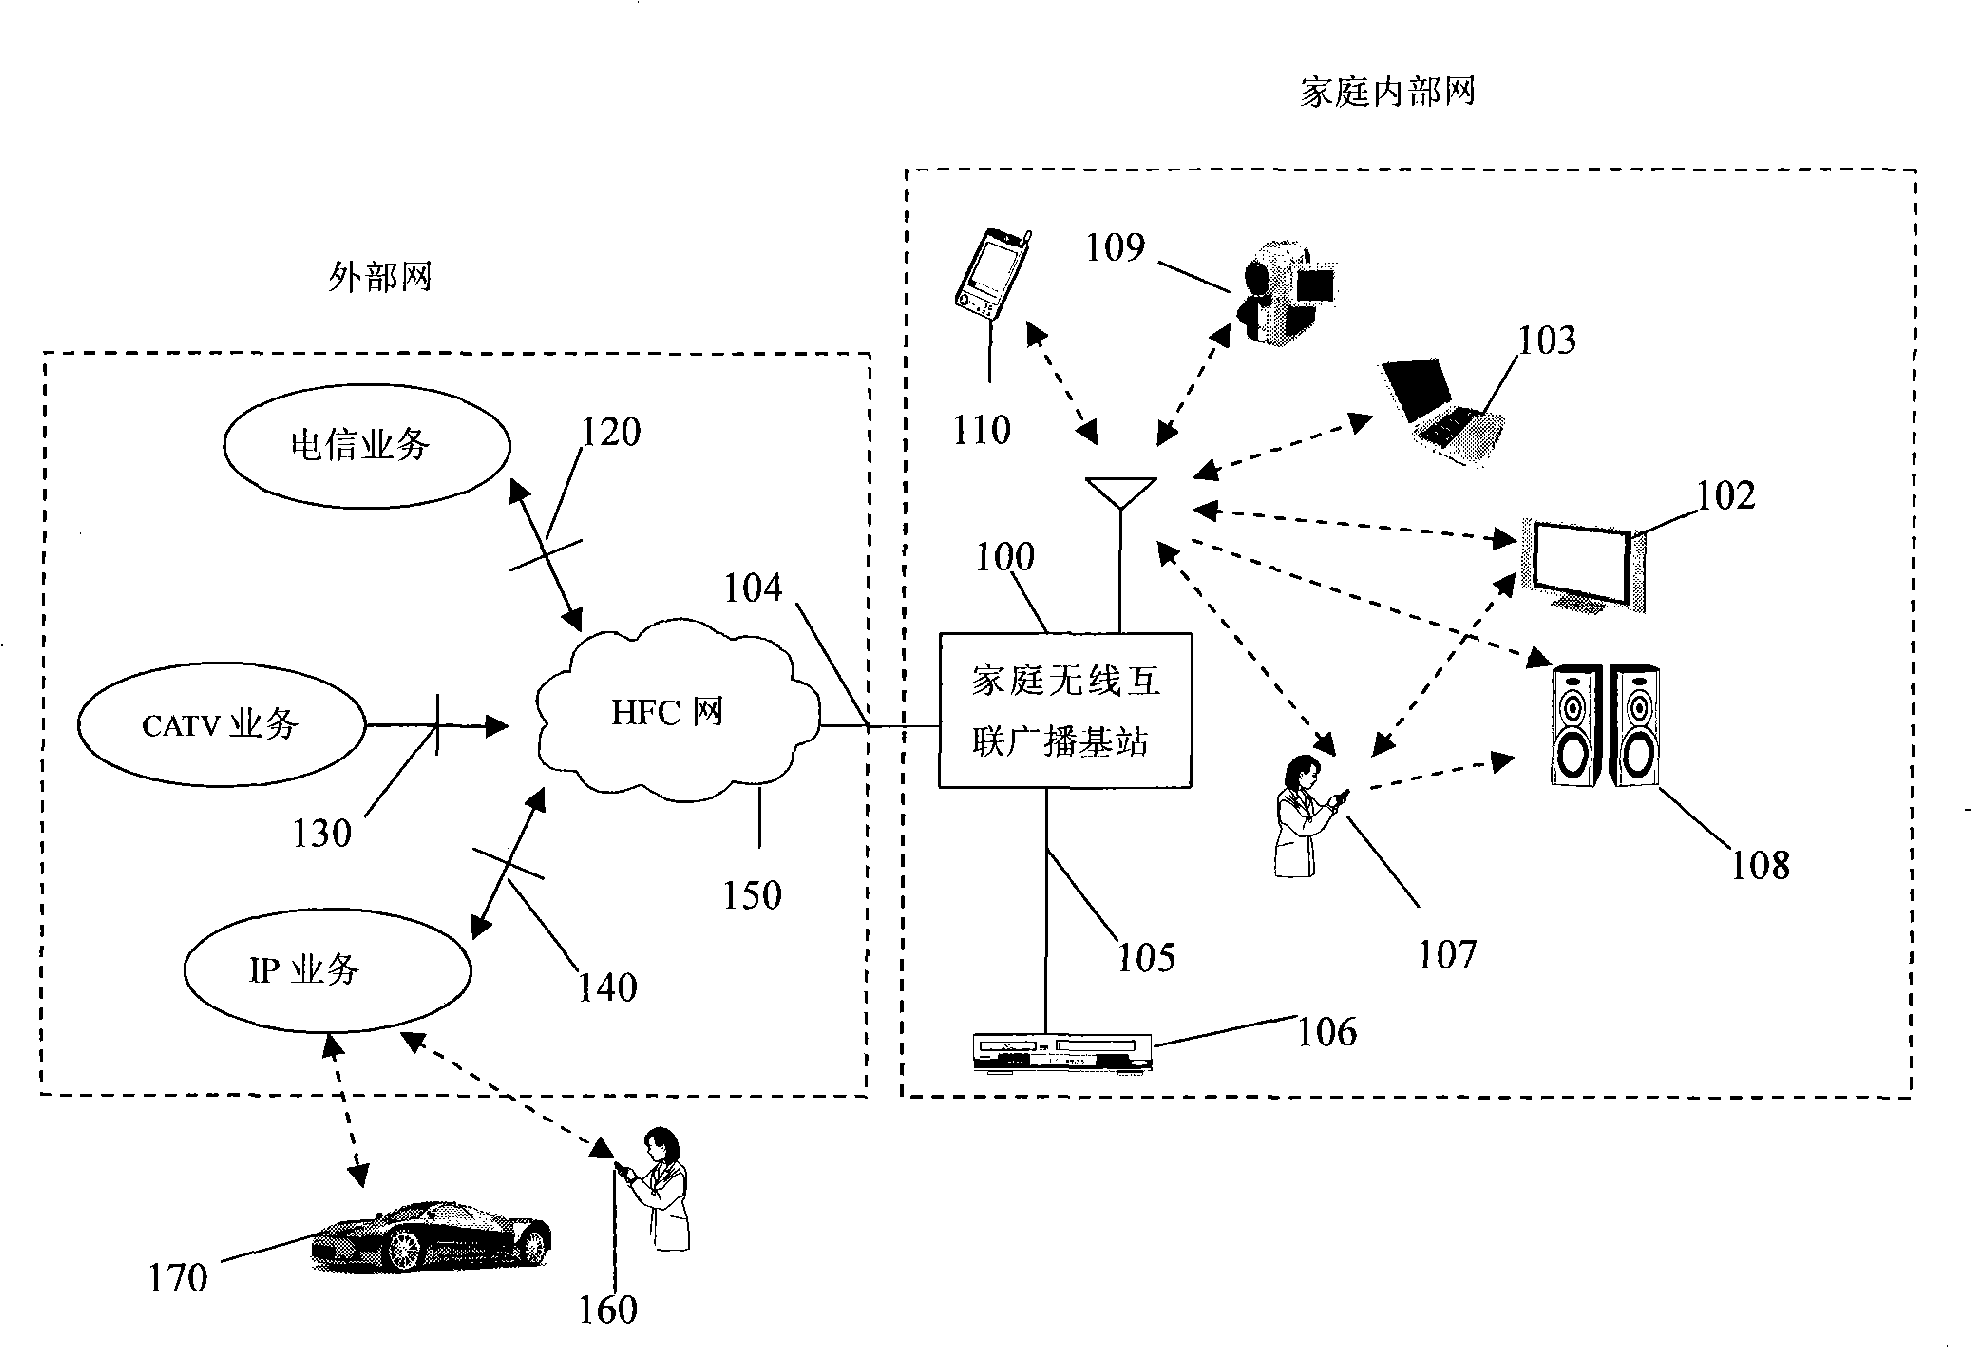 Family wireless interconnected broadcast base station